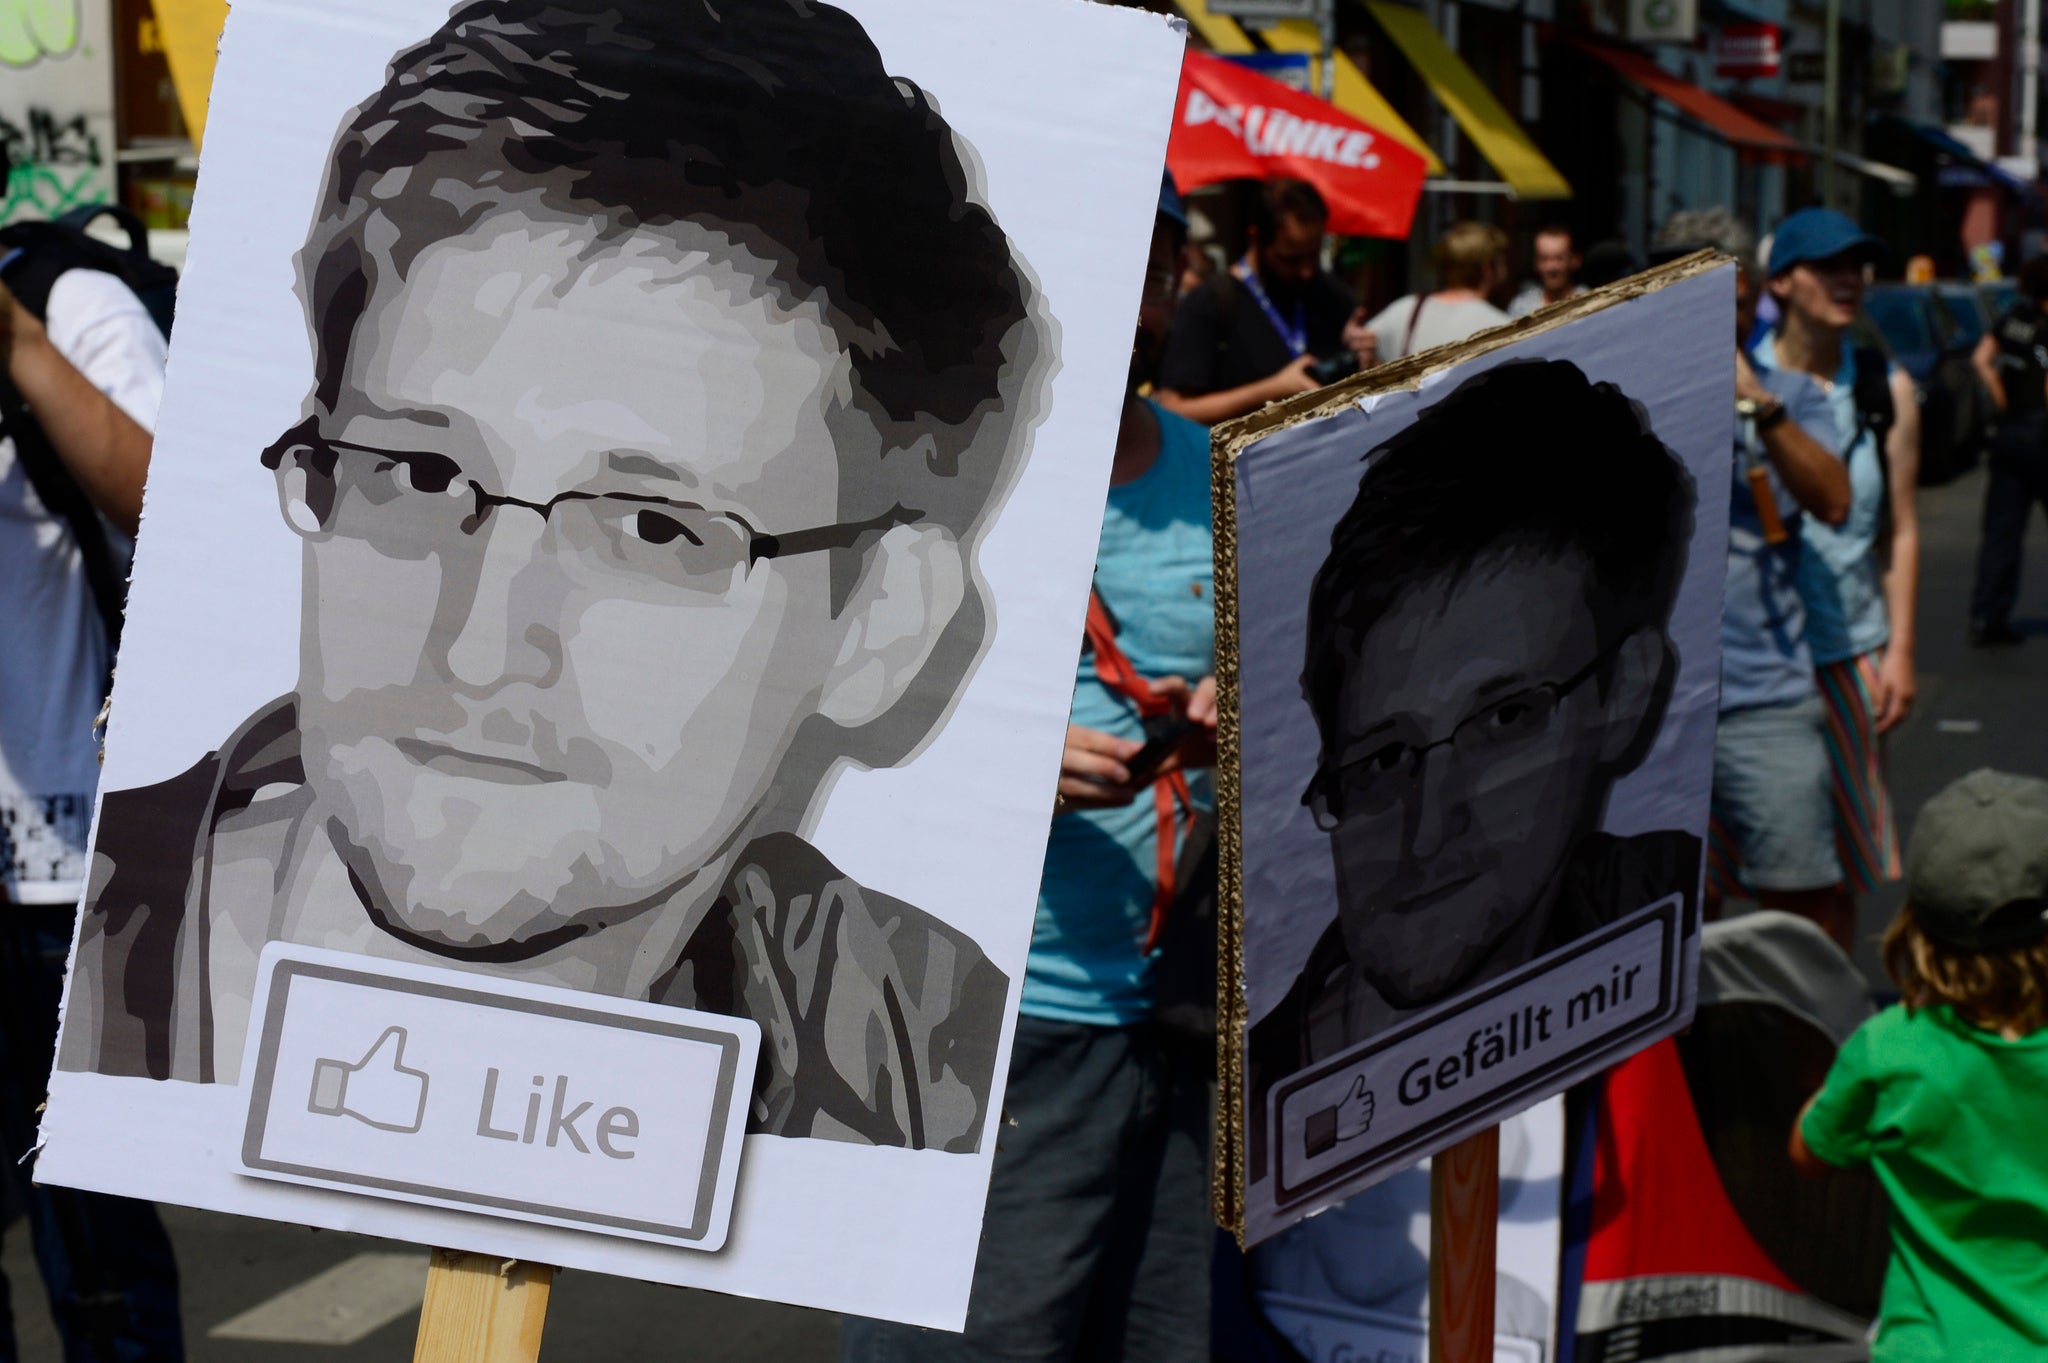 Edward Snowden could be granted asylum in Switzerland if he testifies against the NSA, it has been reported in Swiss media